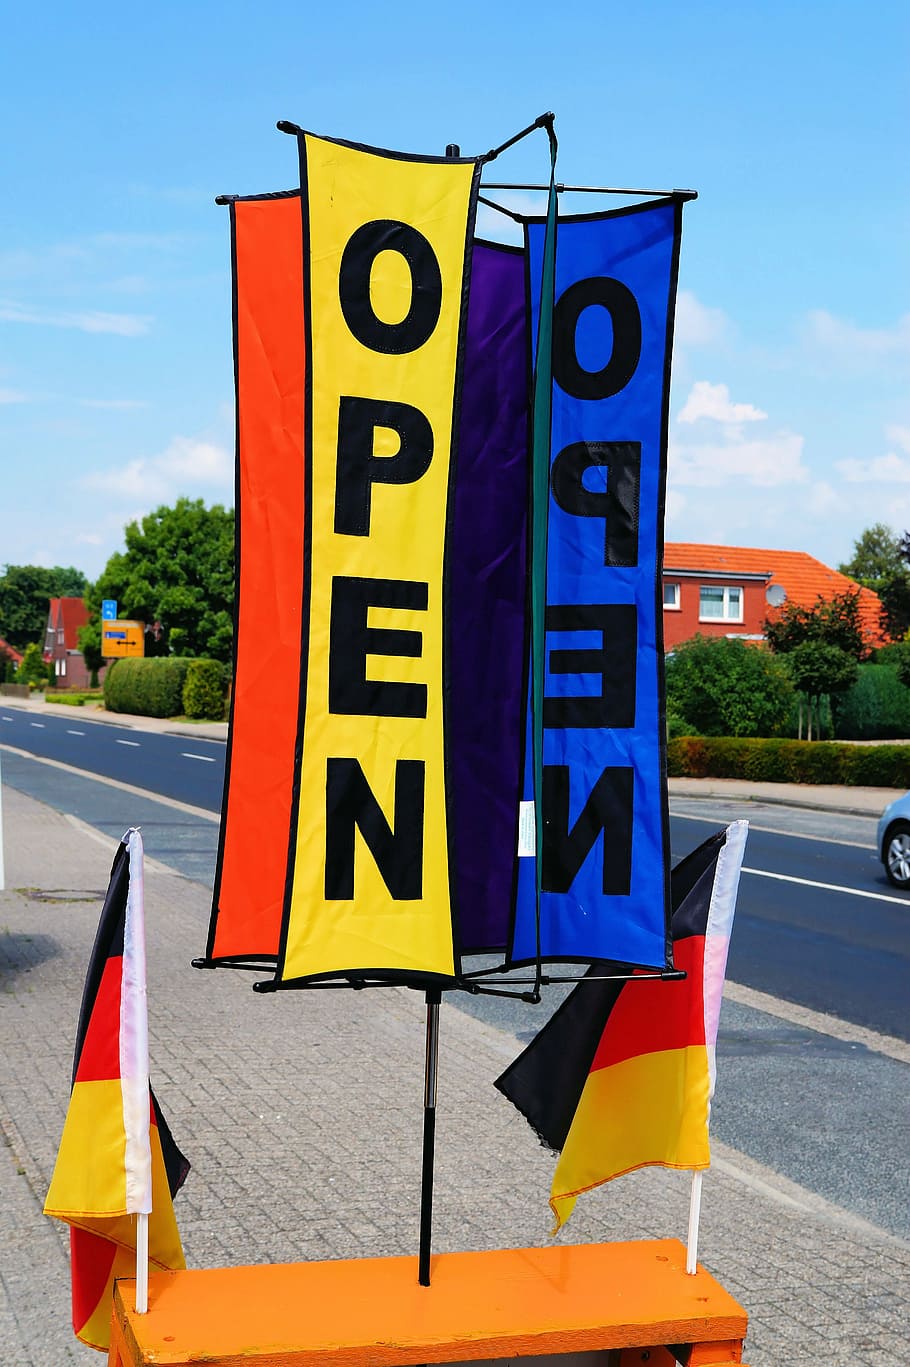 signs, turning, open, multi coloured, striking, business, invitation, colorful, color, sign